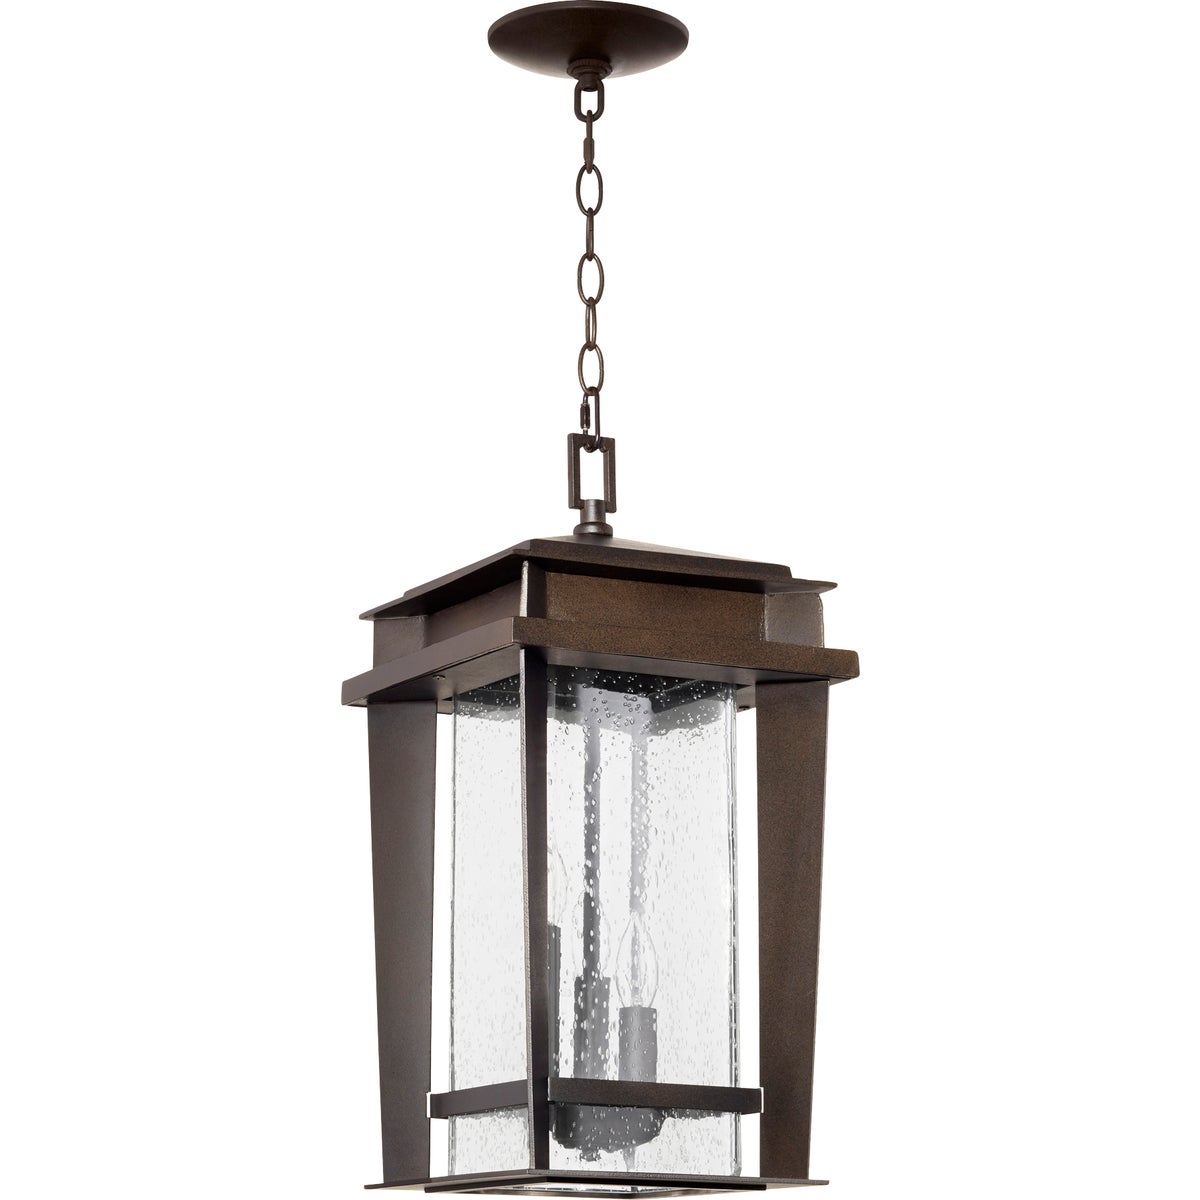 Bronze Outdoor Hanging Light fixture with a chain and a clear seeded glass shade diffuser. Adds mid-century modern flair to your home&#39;s exterior. Safe for damp or wet environments. Perfect for covered porches, patios, or verandas. Crafted from durable metal. Wattage: 60W. Dimensions: 9.5&quot;W x 17&quot;H. UL Listed. Wet Location safety rating. 2-year warranty.